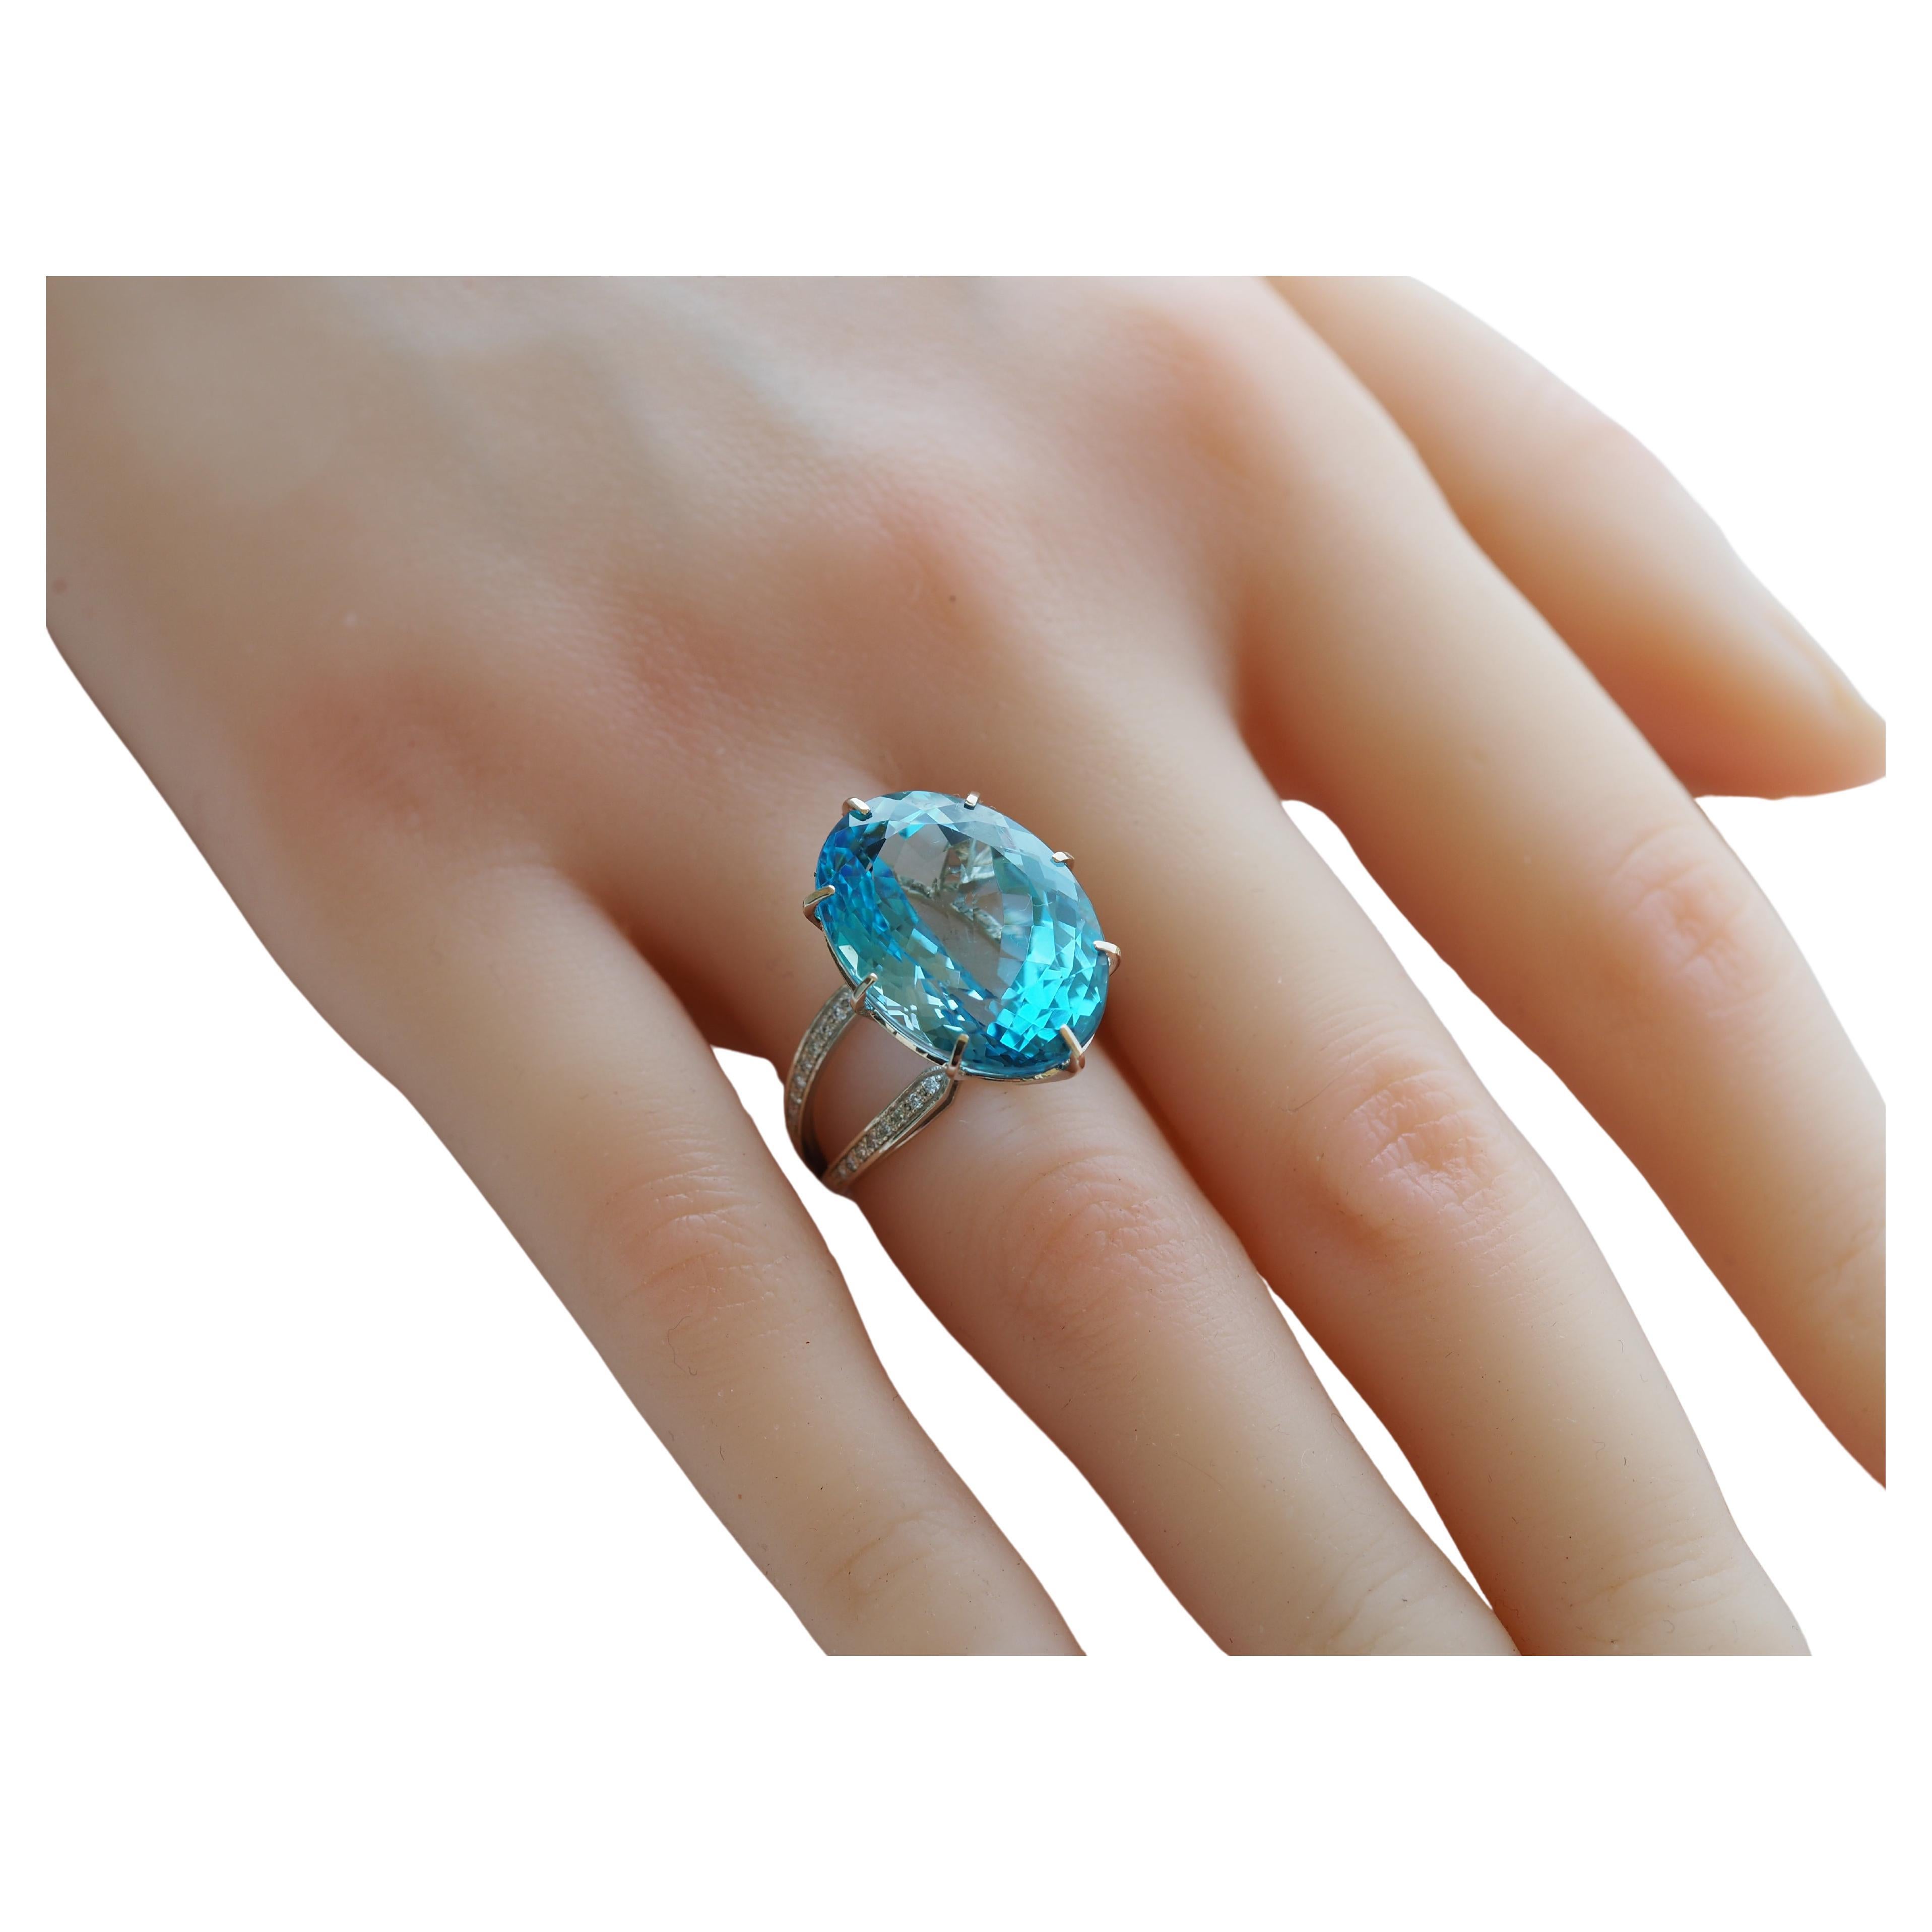 14 Karat Gold Ring with Oval Topaz and Diamonds, Gold Ring with Sky Blue Topaz For Sale